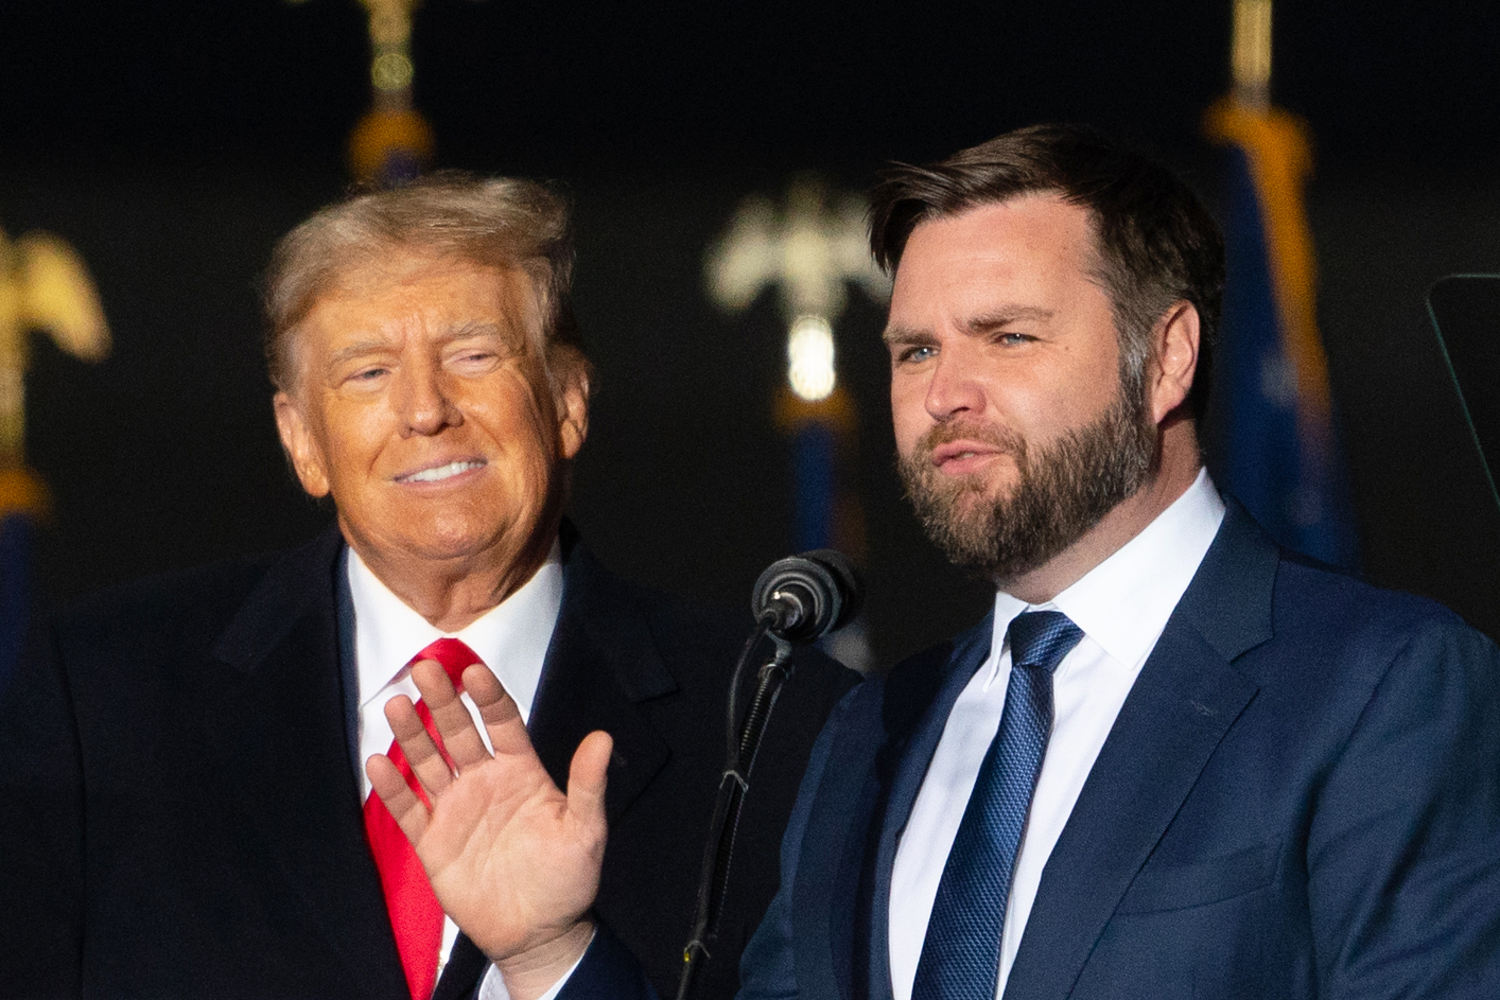 JD Vance's VP prospects could rise after he helped deliver Trump a big Ohio win